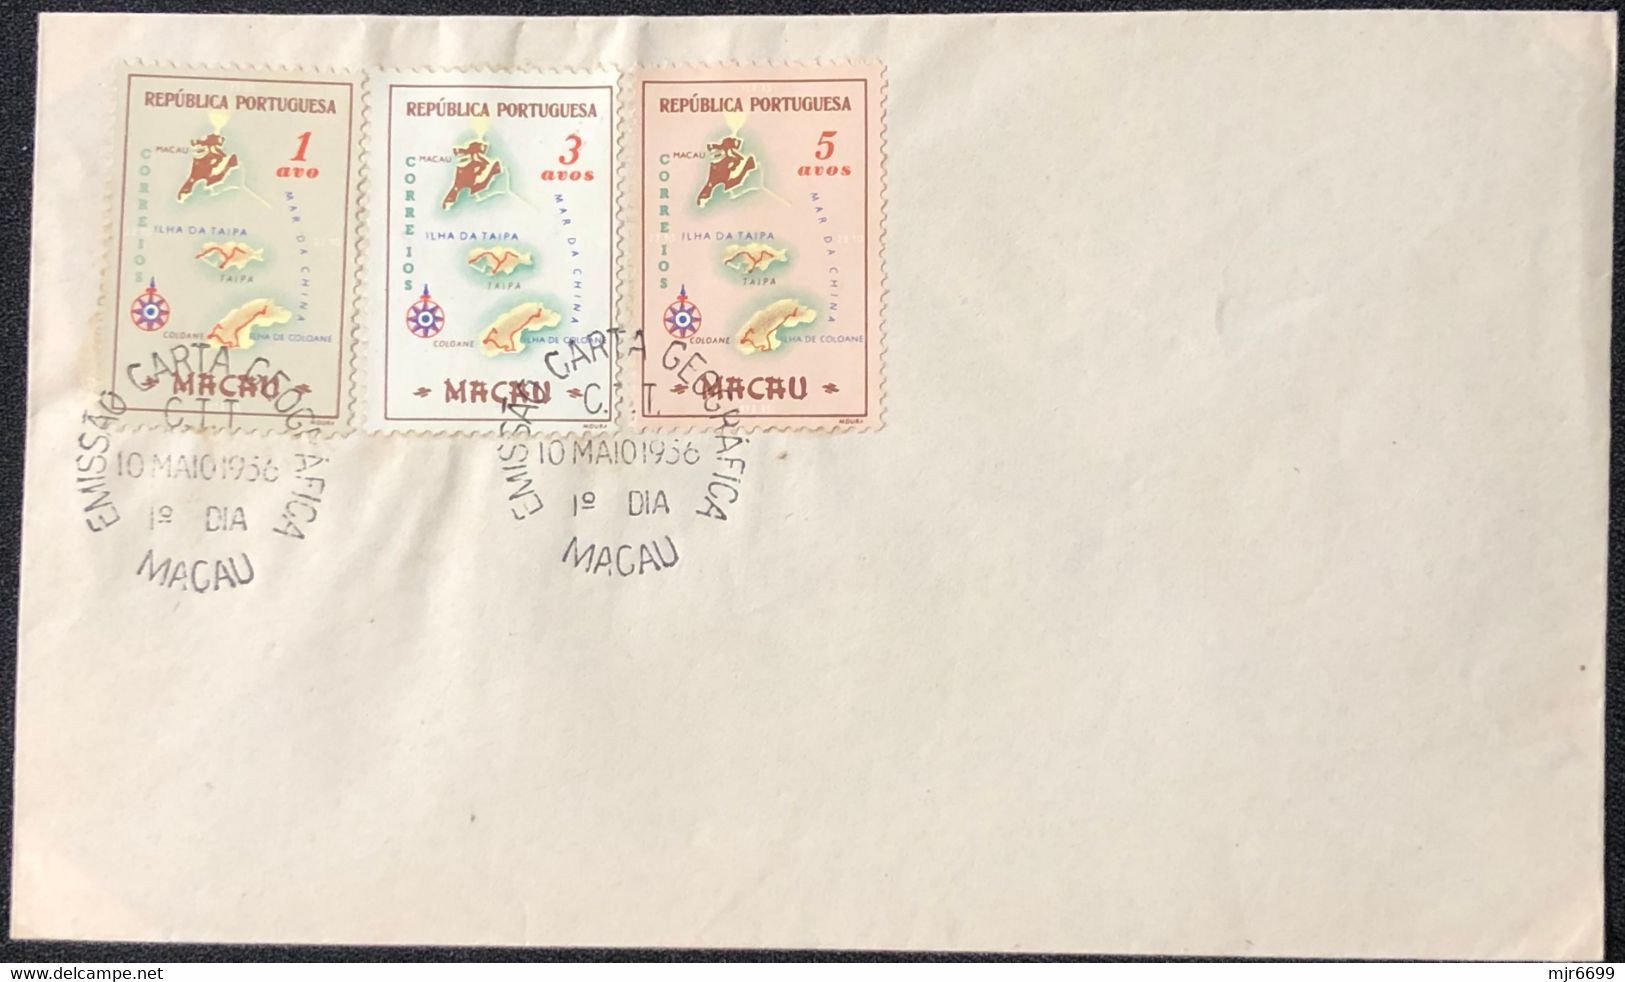 1956 GEOGRAPHIC CHART OF MACAU FDC X 4 COVERS ALL DIFFERENT - CAT. 85 EUROSOR COMPLETE SET. - Covers & Documents